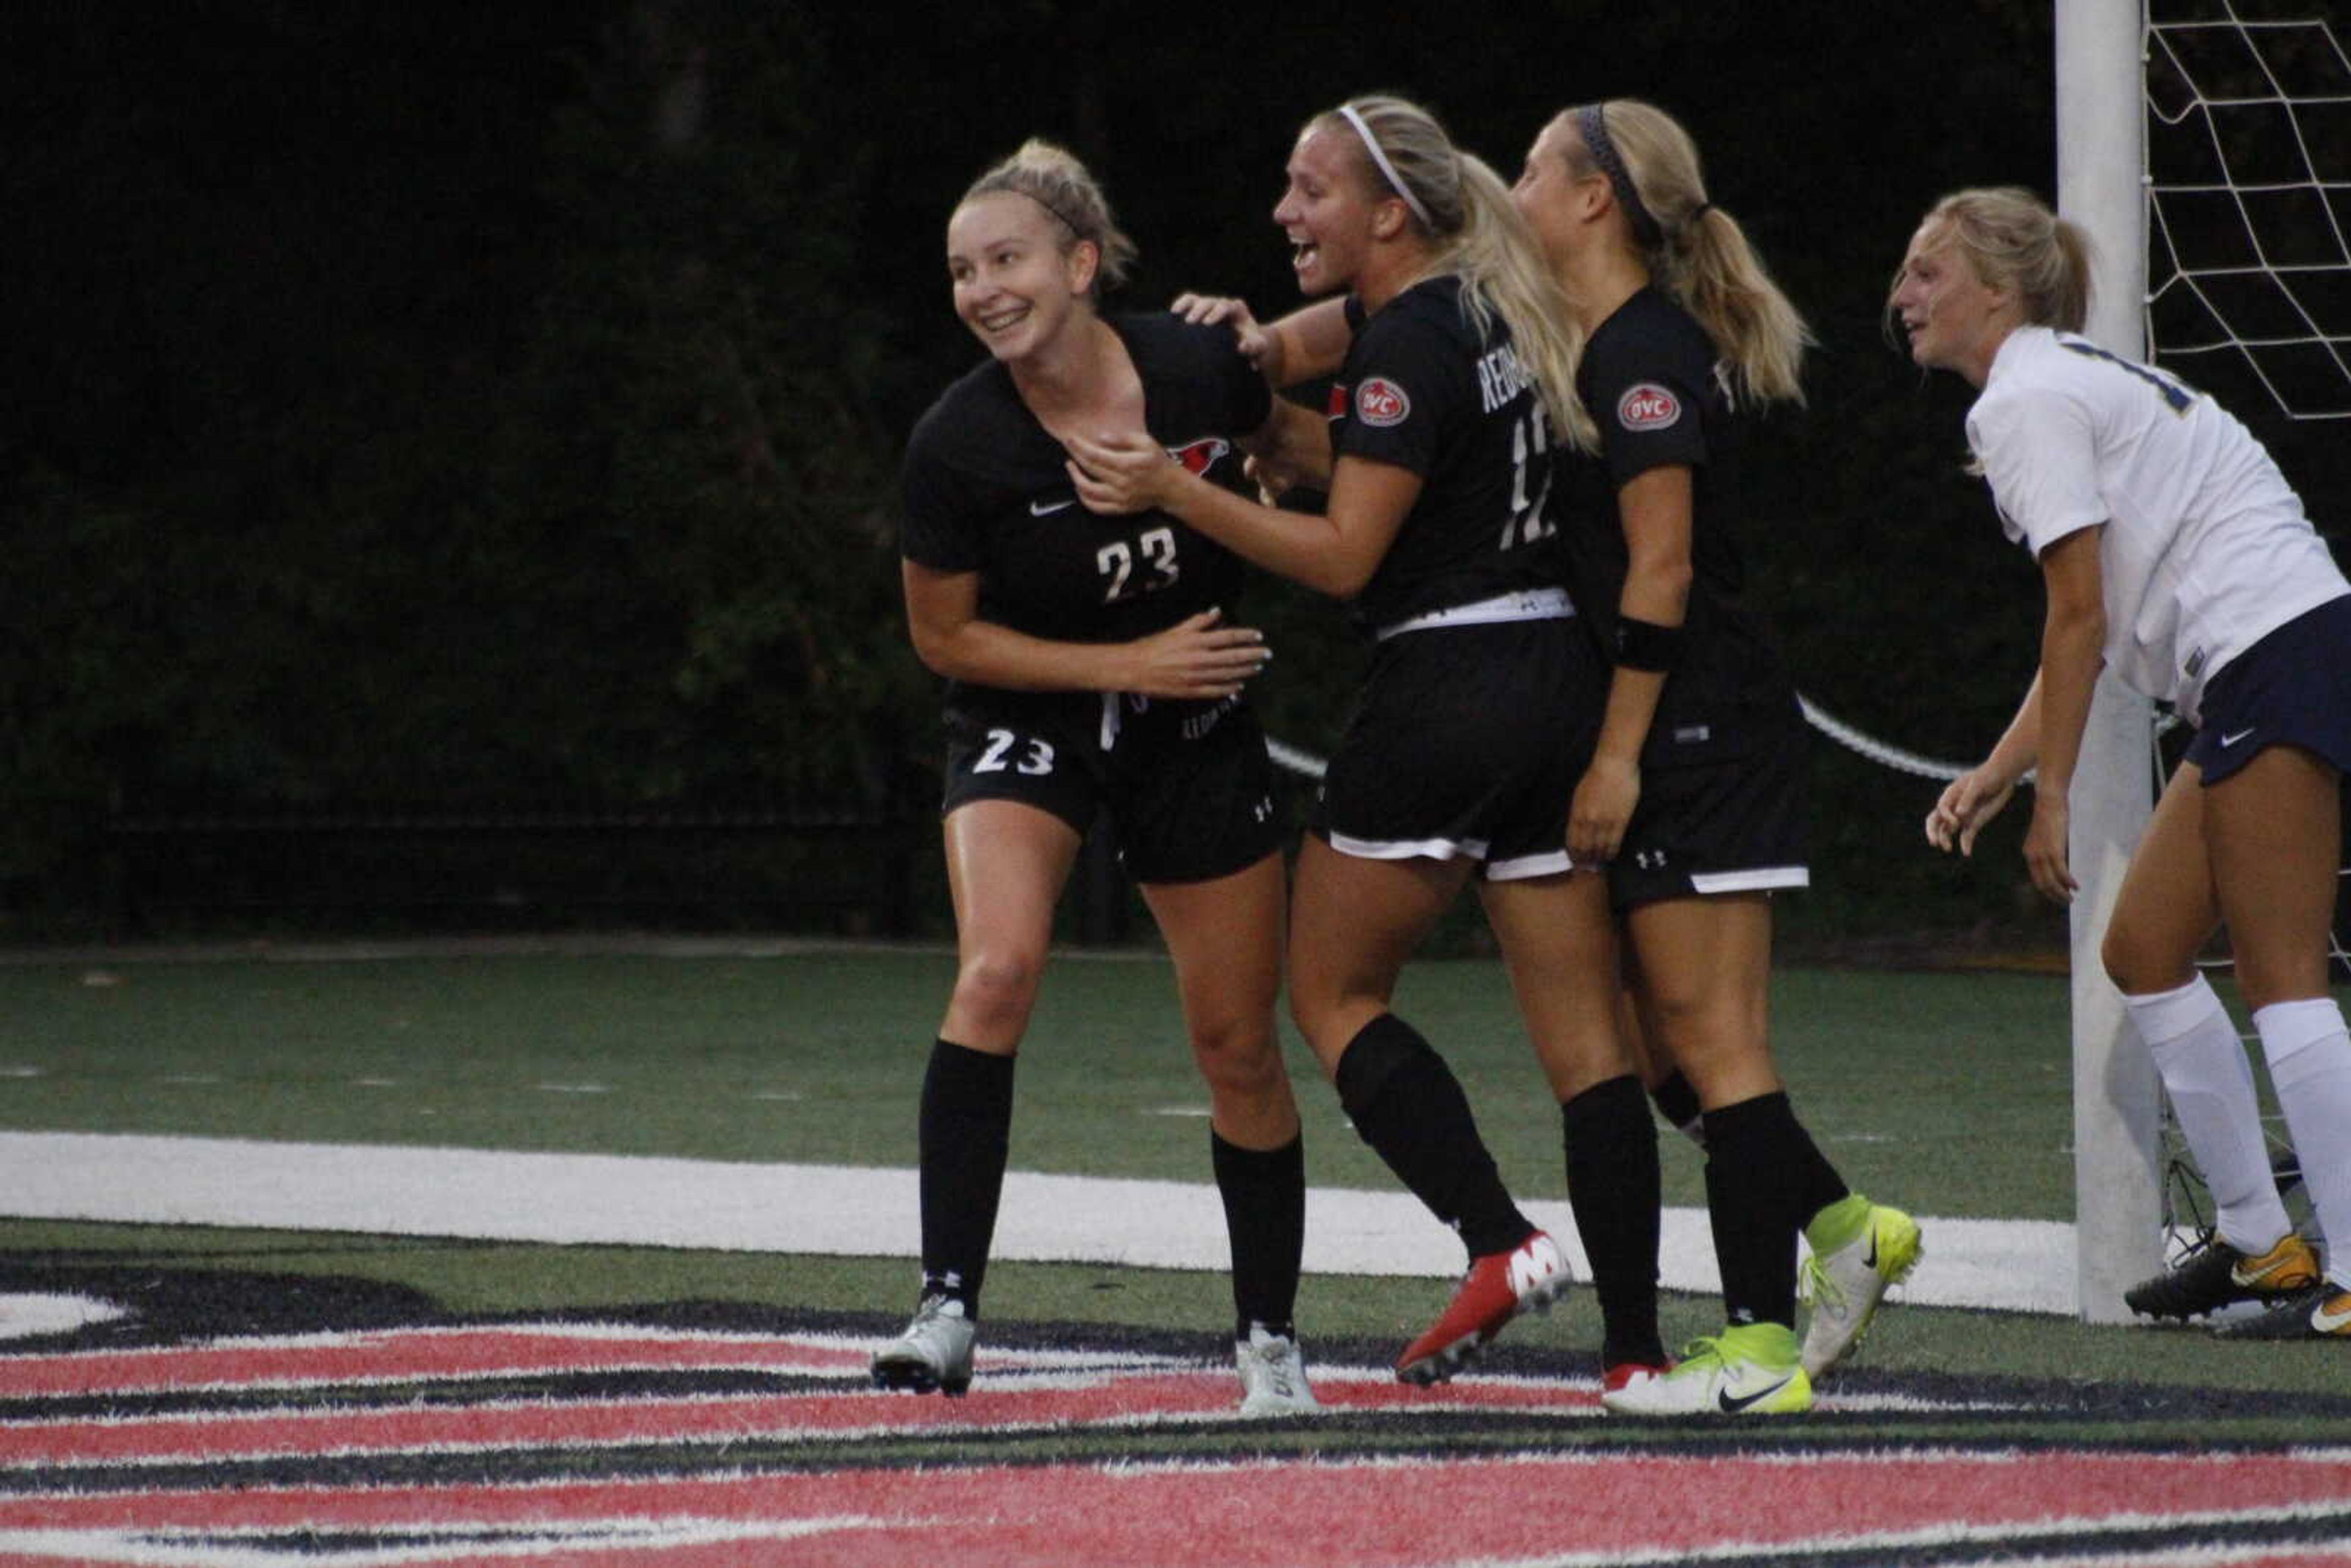 Jennifer Brien, number 23, celebrates with teammates after scoring the first goal of the match against UIS on Aug. 24